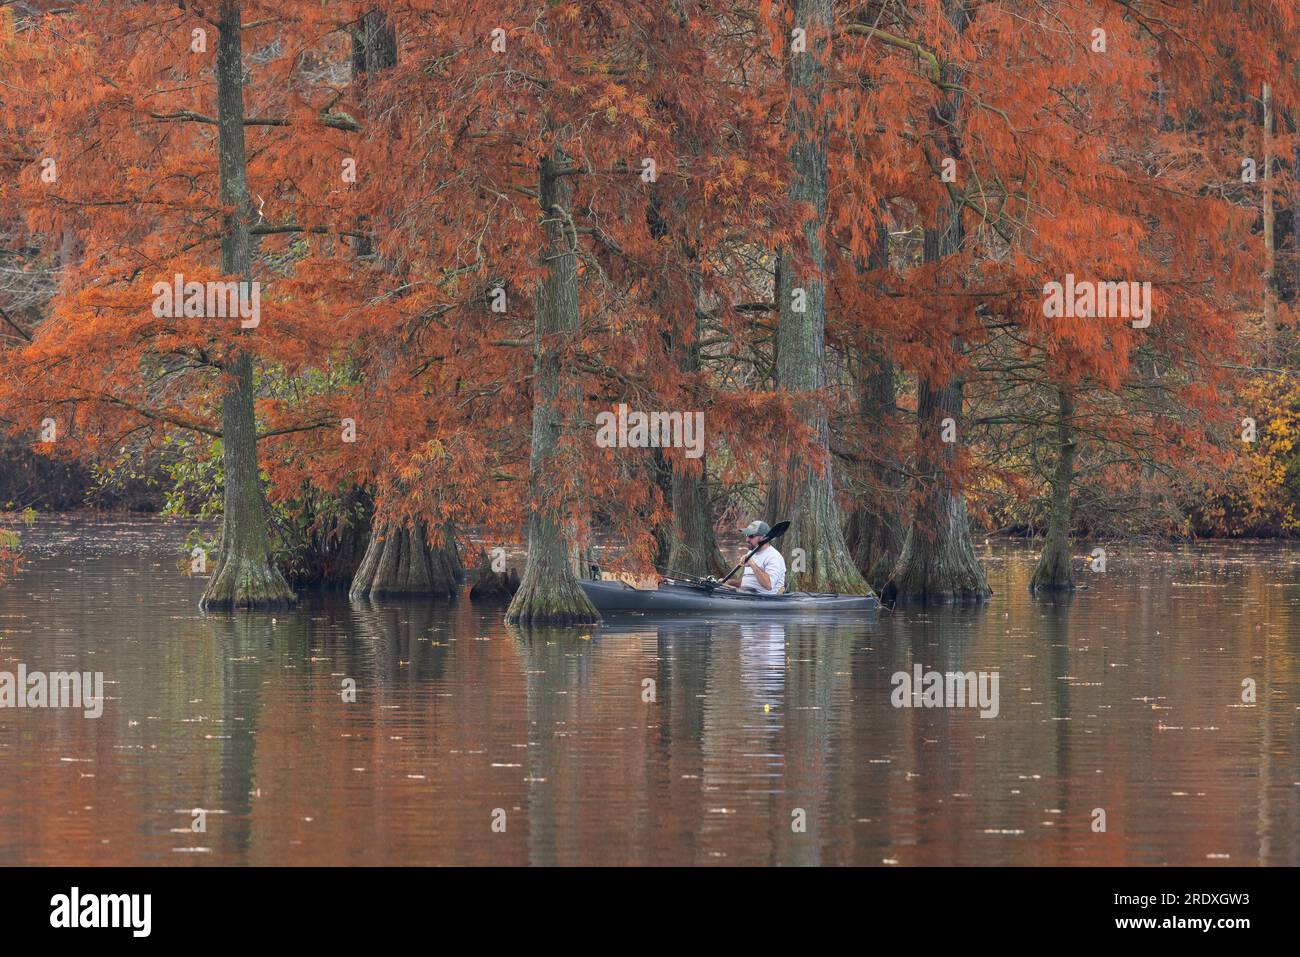 Kayaker and bald cypress trees (Taxodium distichum) in autumn, Trap Pond State Park, Delaware Stock Photo